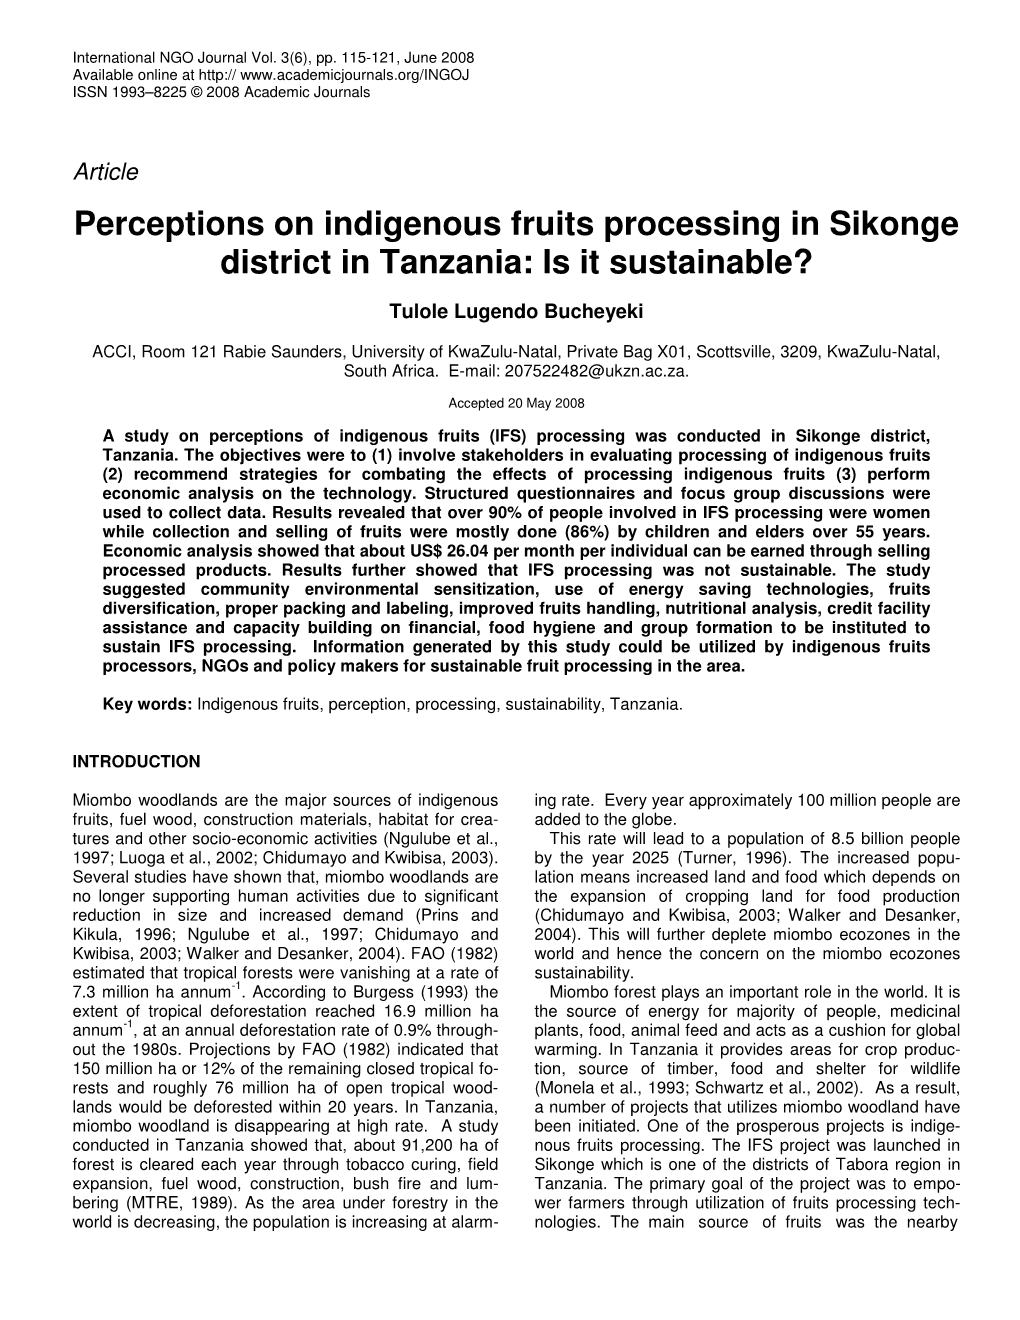 Perceptions on Indigenous Fruits Processing in Sikonge District in Tanzania: Is It Sustainable?